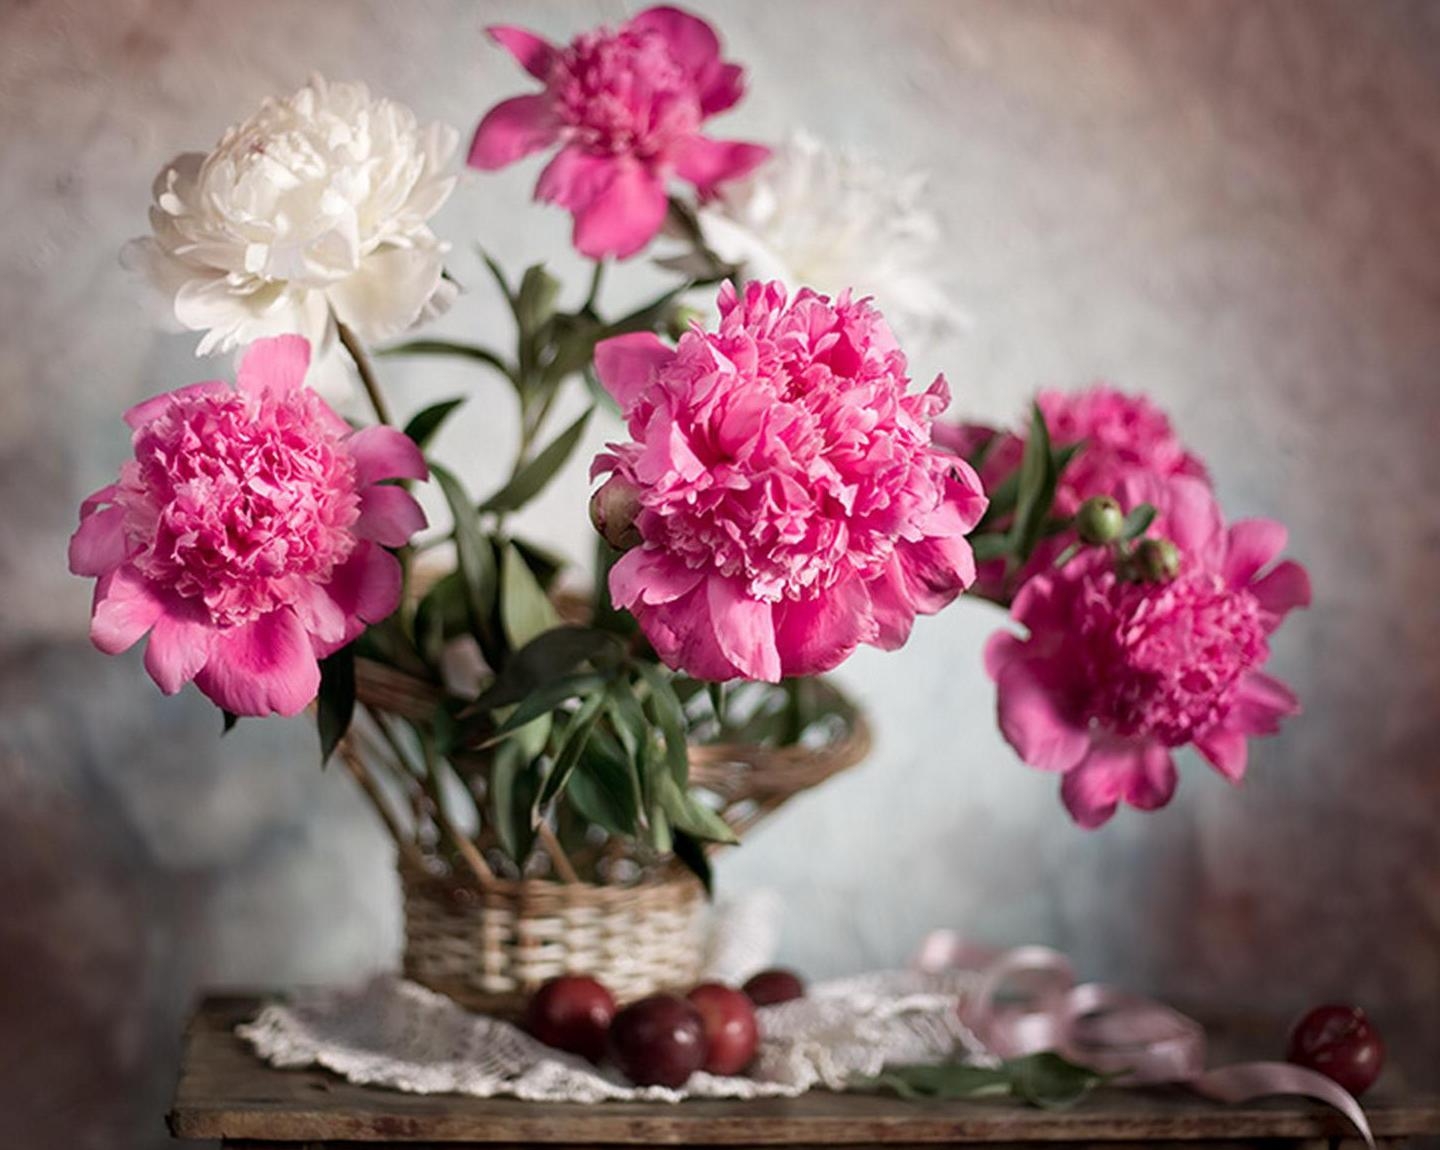 bouquet, flowers, peonies, blur, smooth, tape, basket